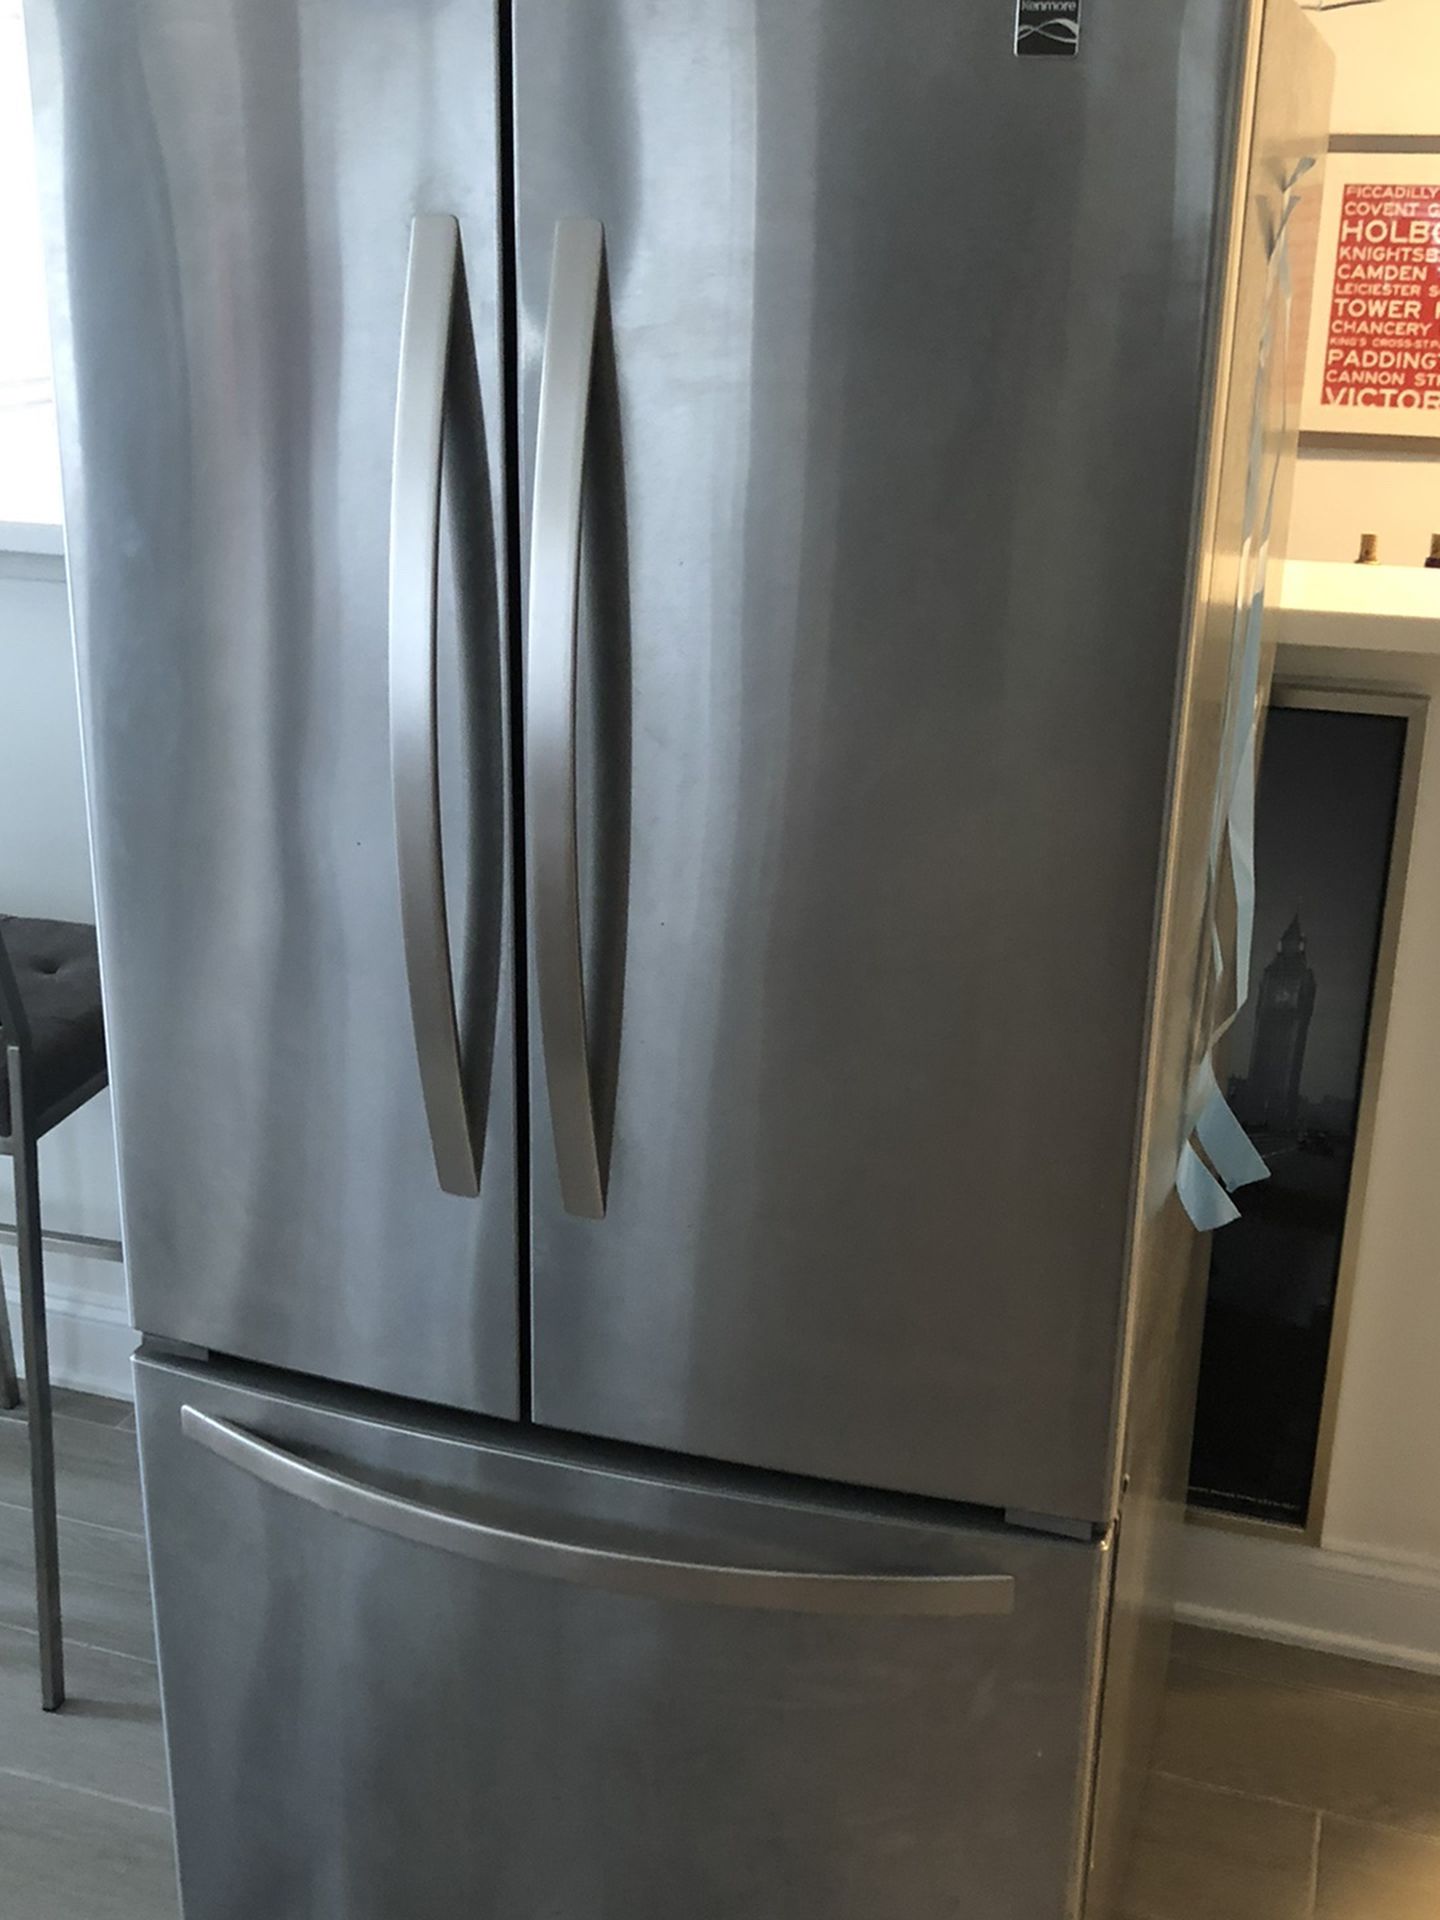 Kenmore Stainless Steel French Door Refrigerator And Bottom Freezer- Delivery Available